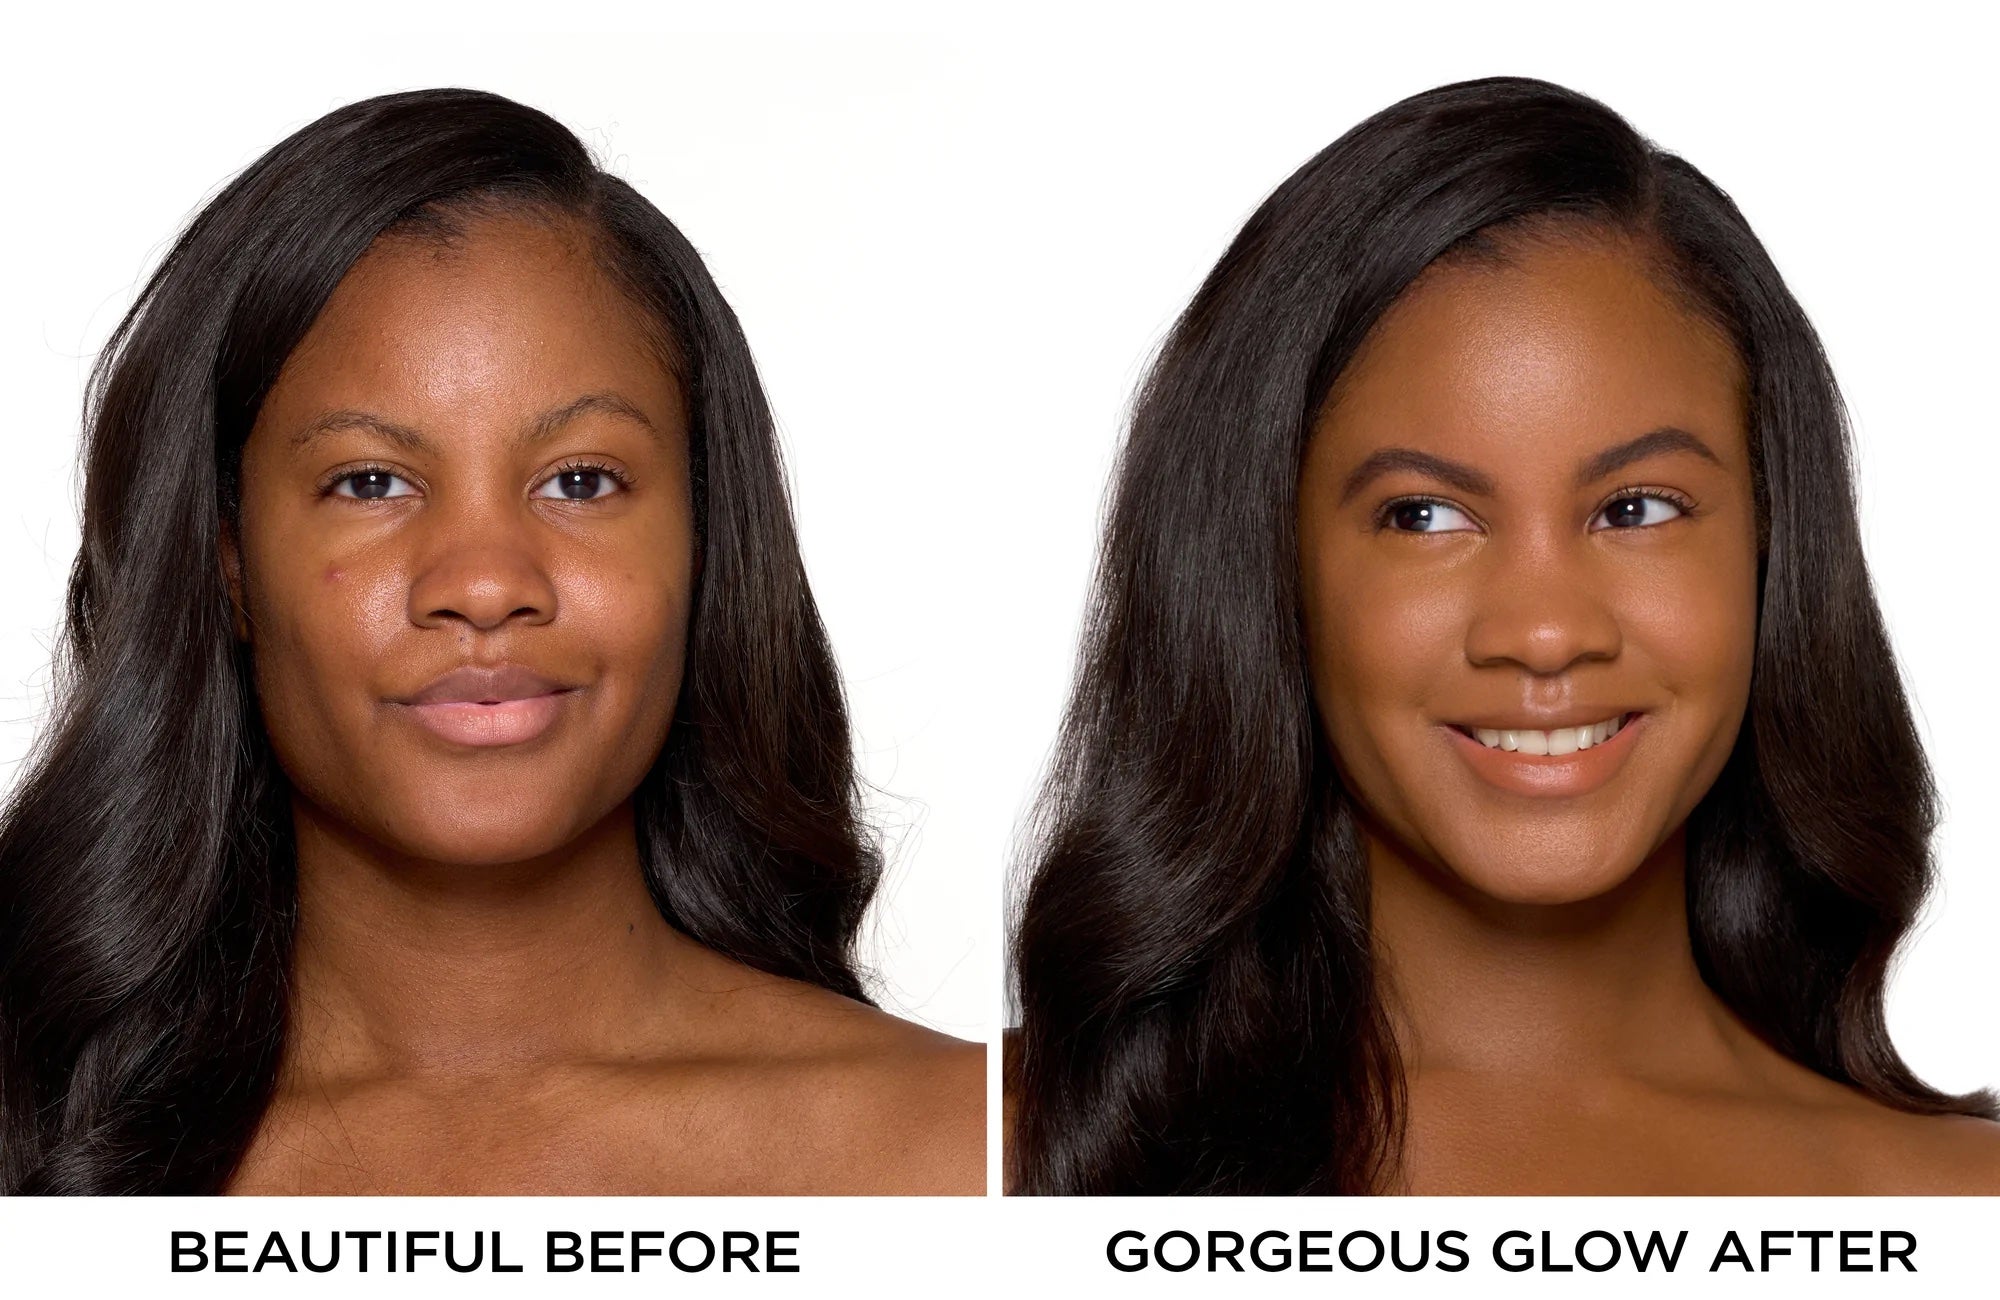 model without foundation, then model with foundation